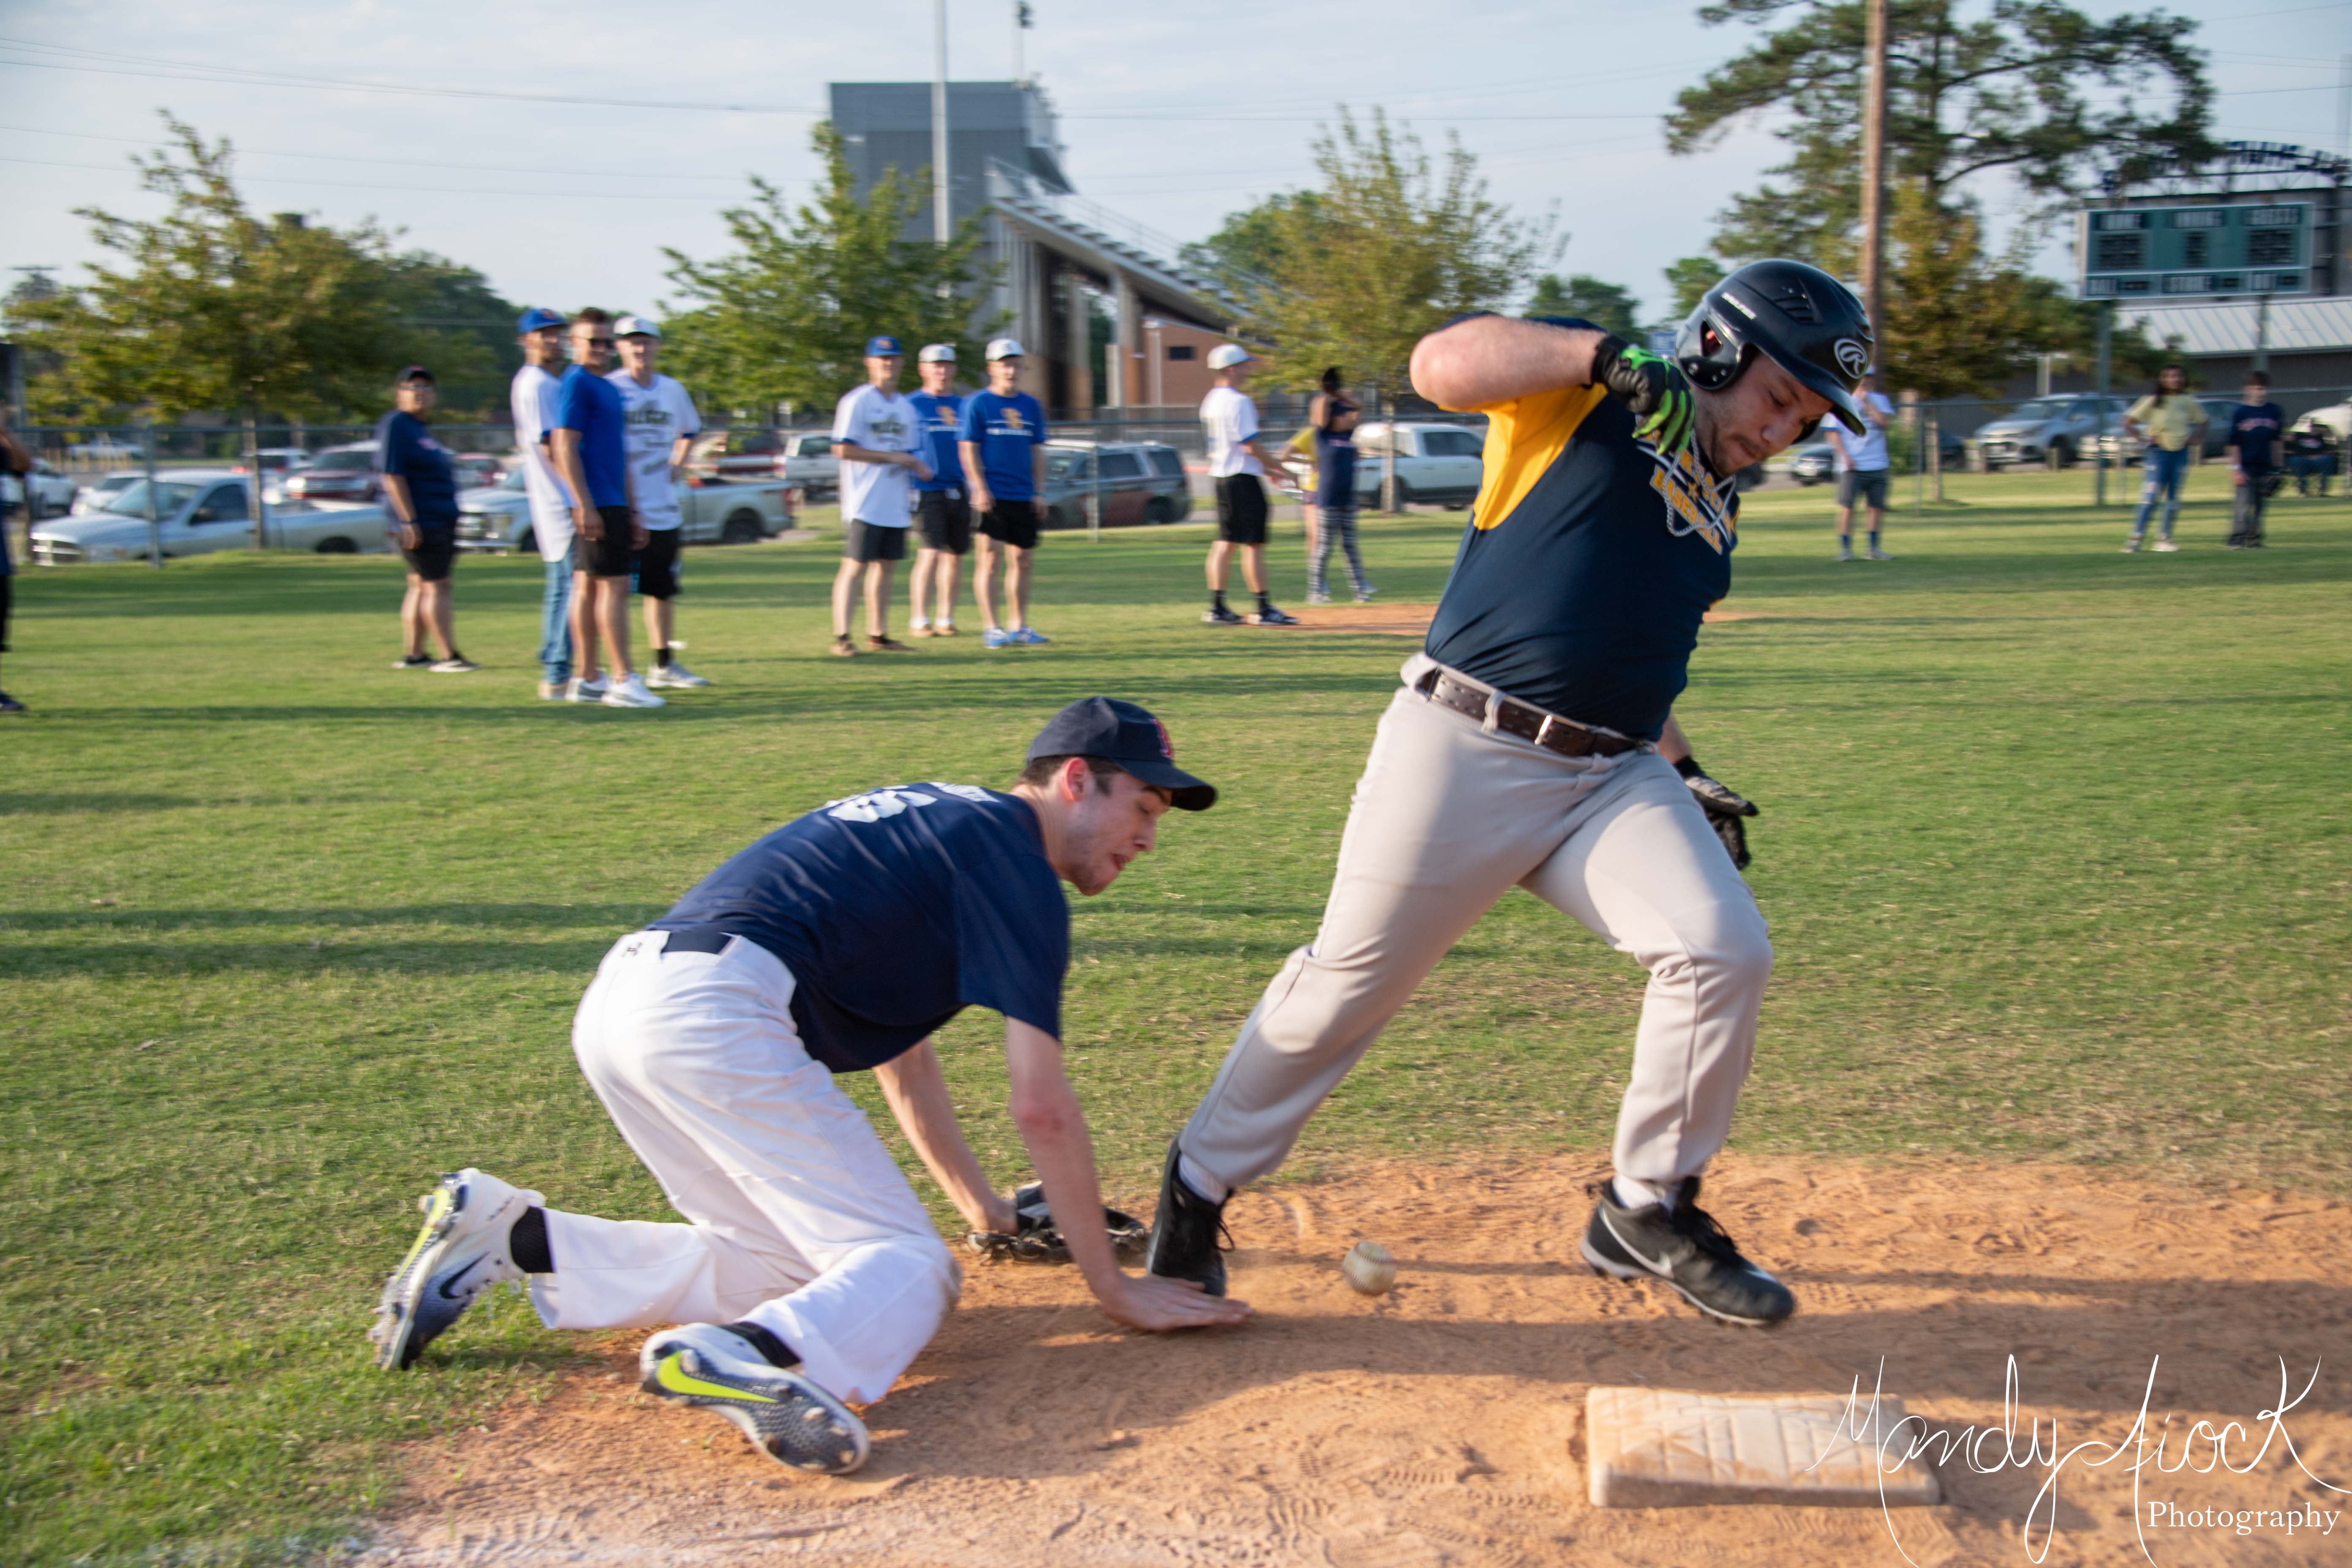 Photos from Brightstar Baseball’s Community Night games by Mandy Fiock Photography!